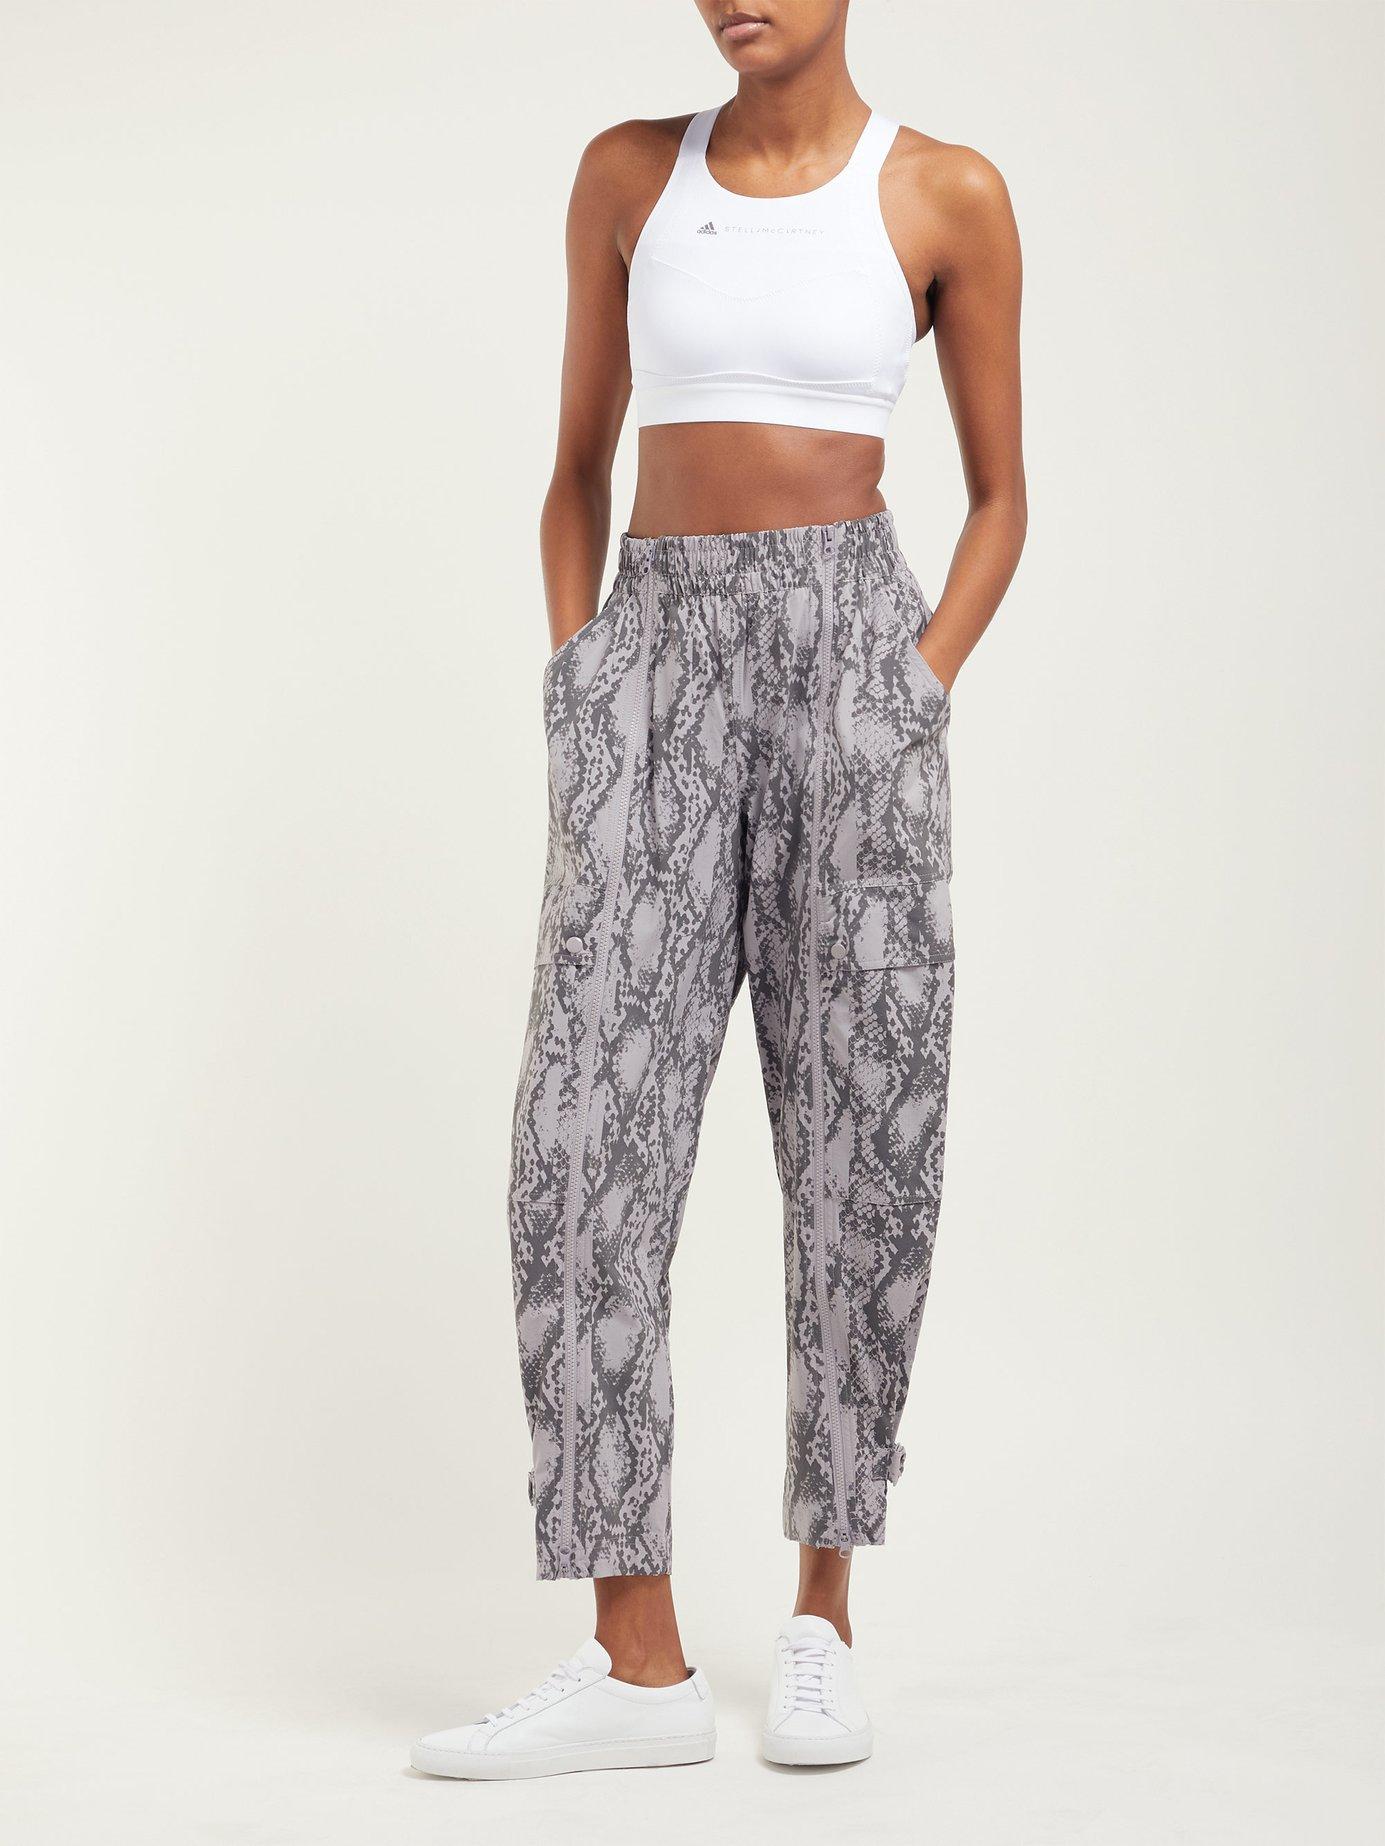 adidas By Stella McCartney Synthetic Performance Snakeskin Print Track Pants  in Grey Print (Gray) - Lyst